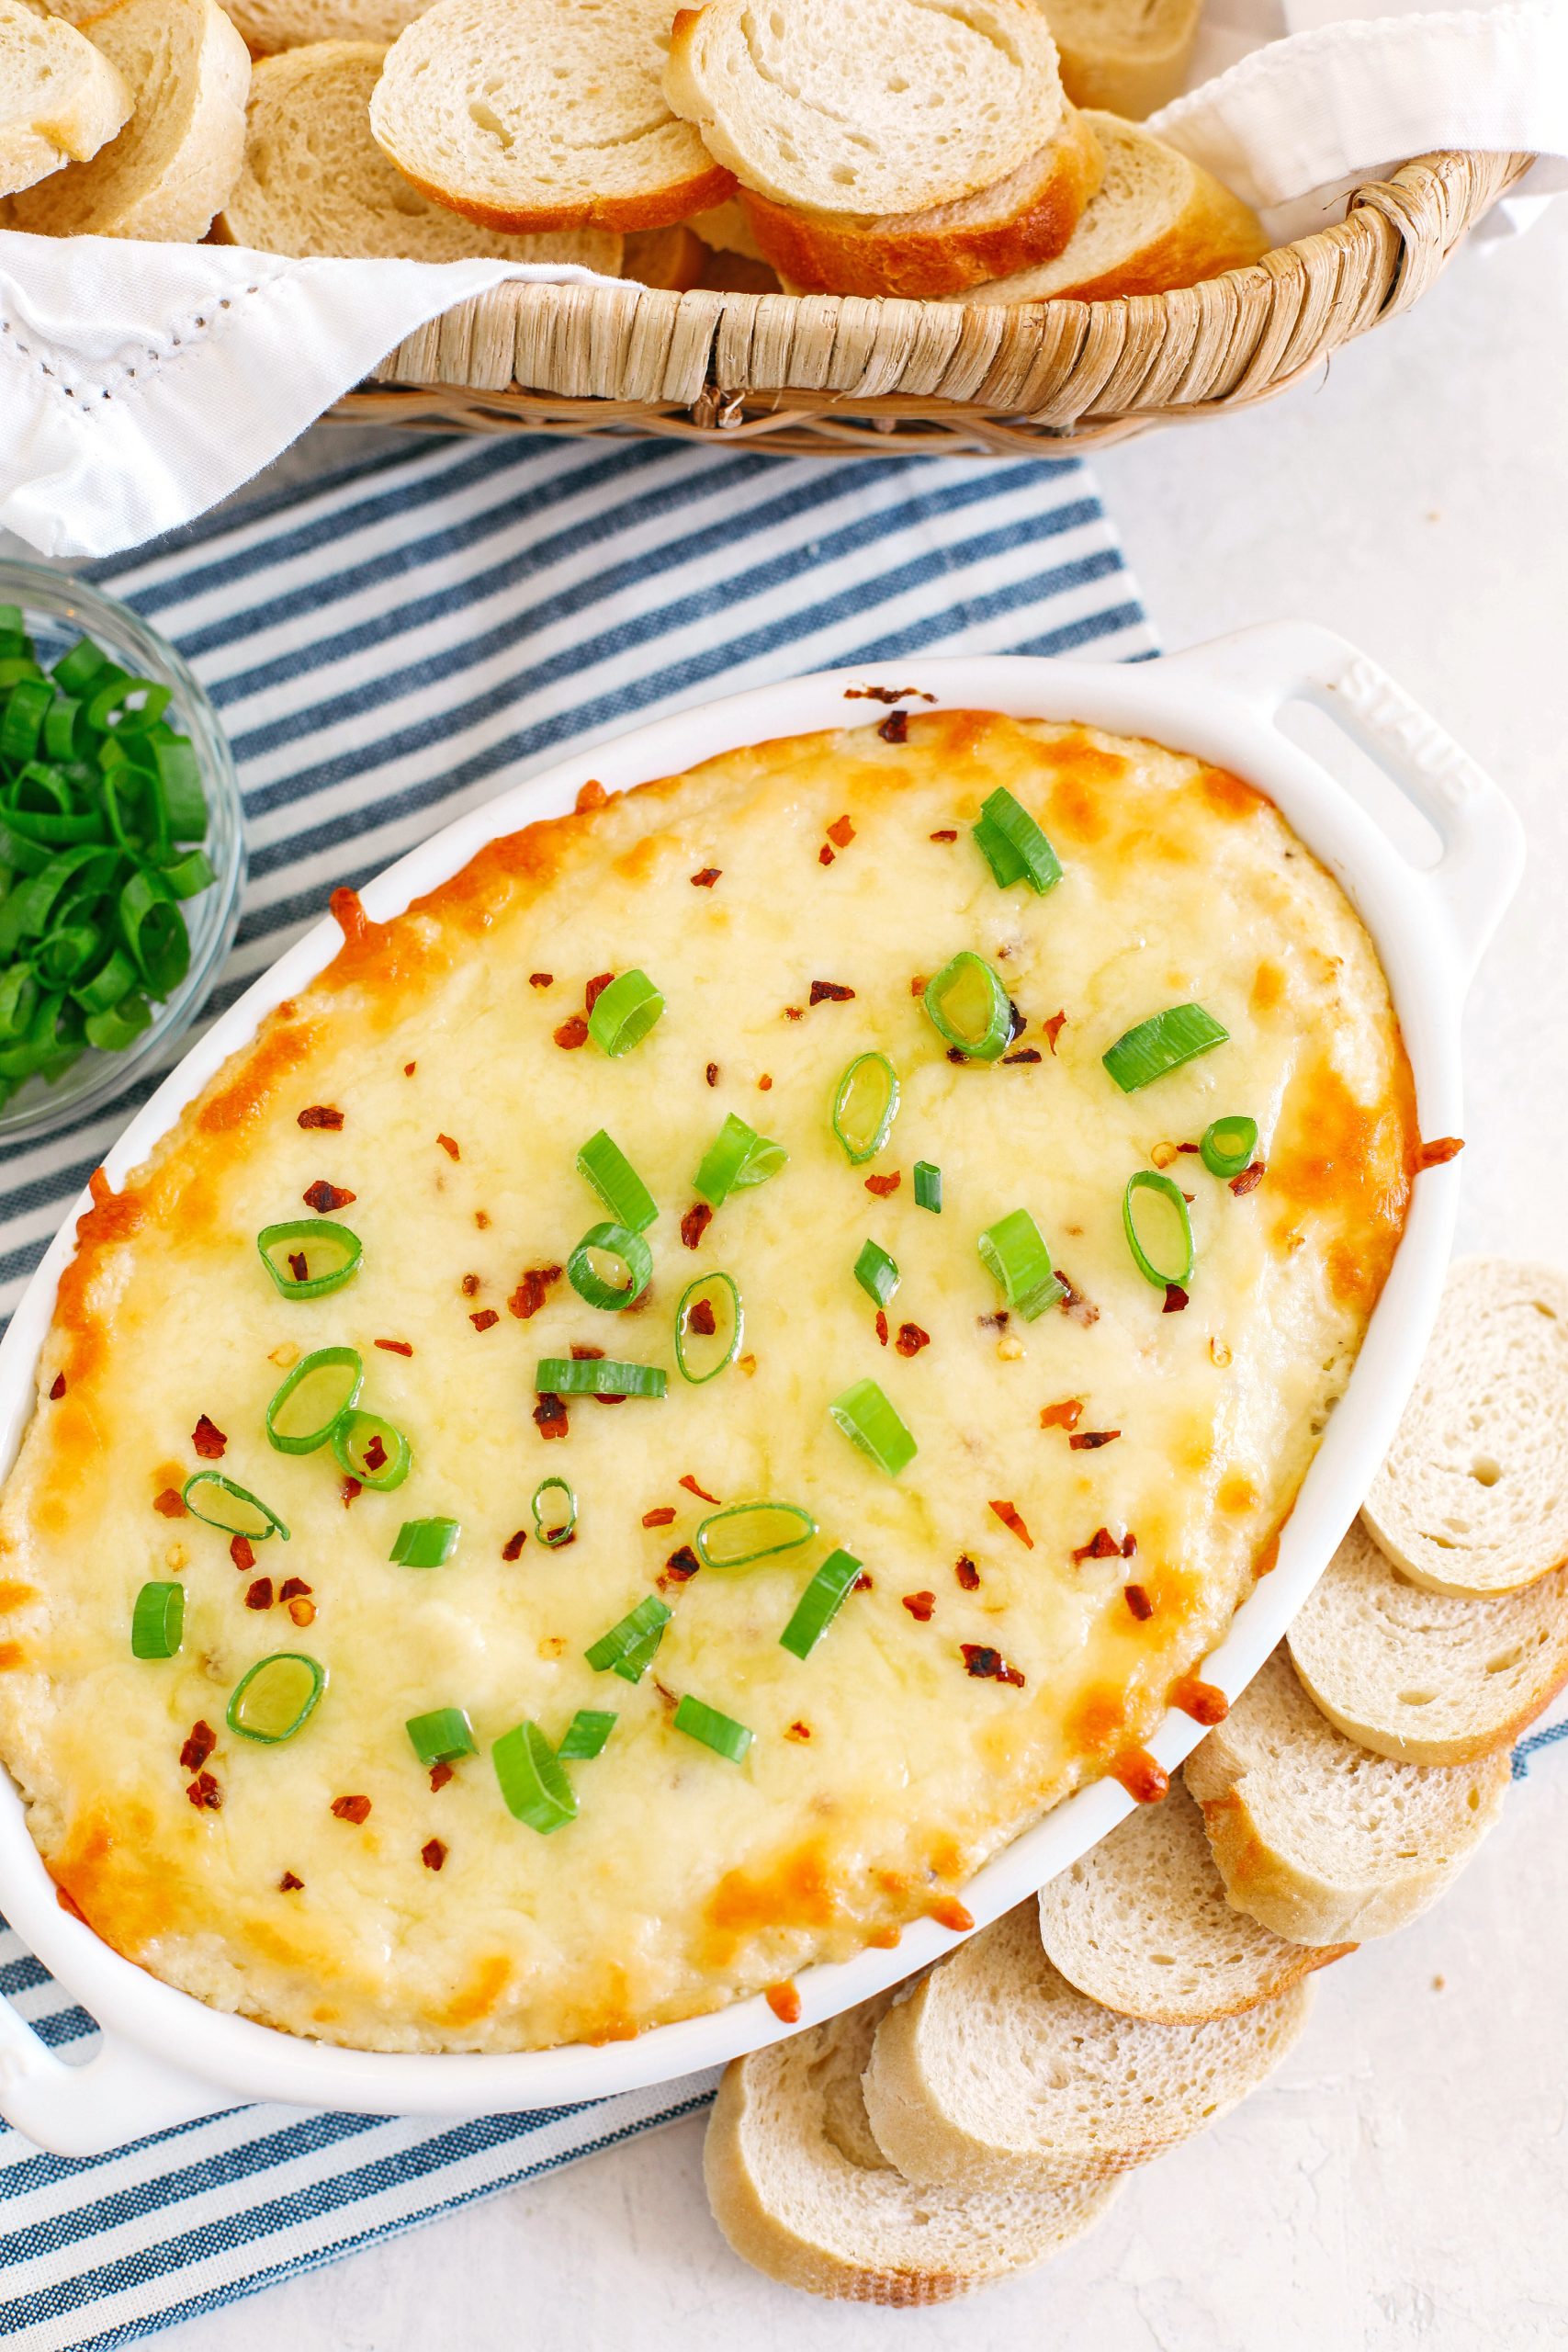 This creamy and delicious Cheesy Roasted Cauliflower Dip makes the perfect healthy appetizer that is easy to make and full of so much flavor!